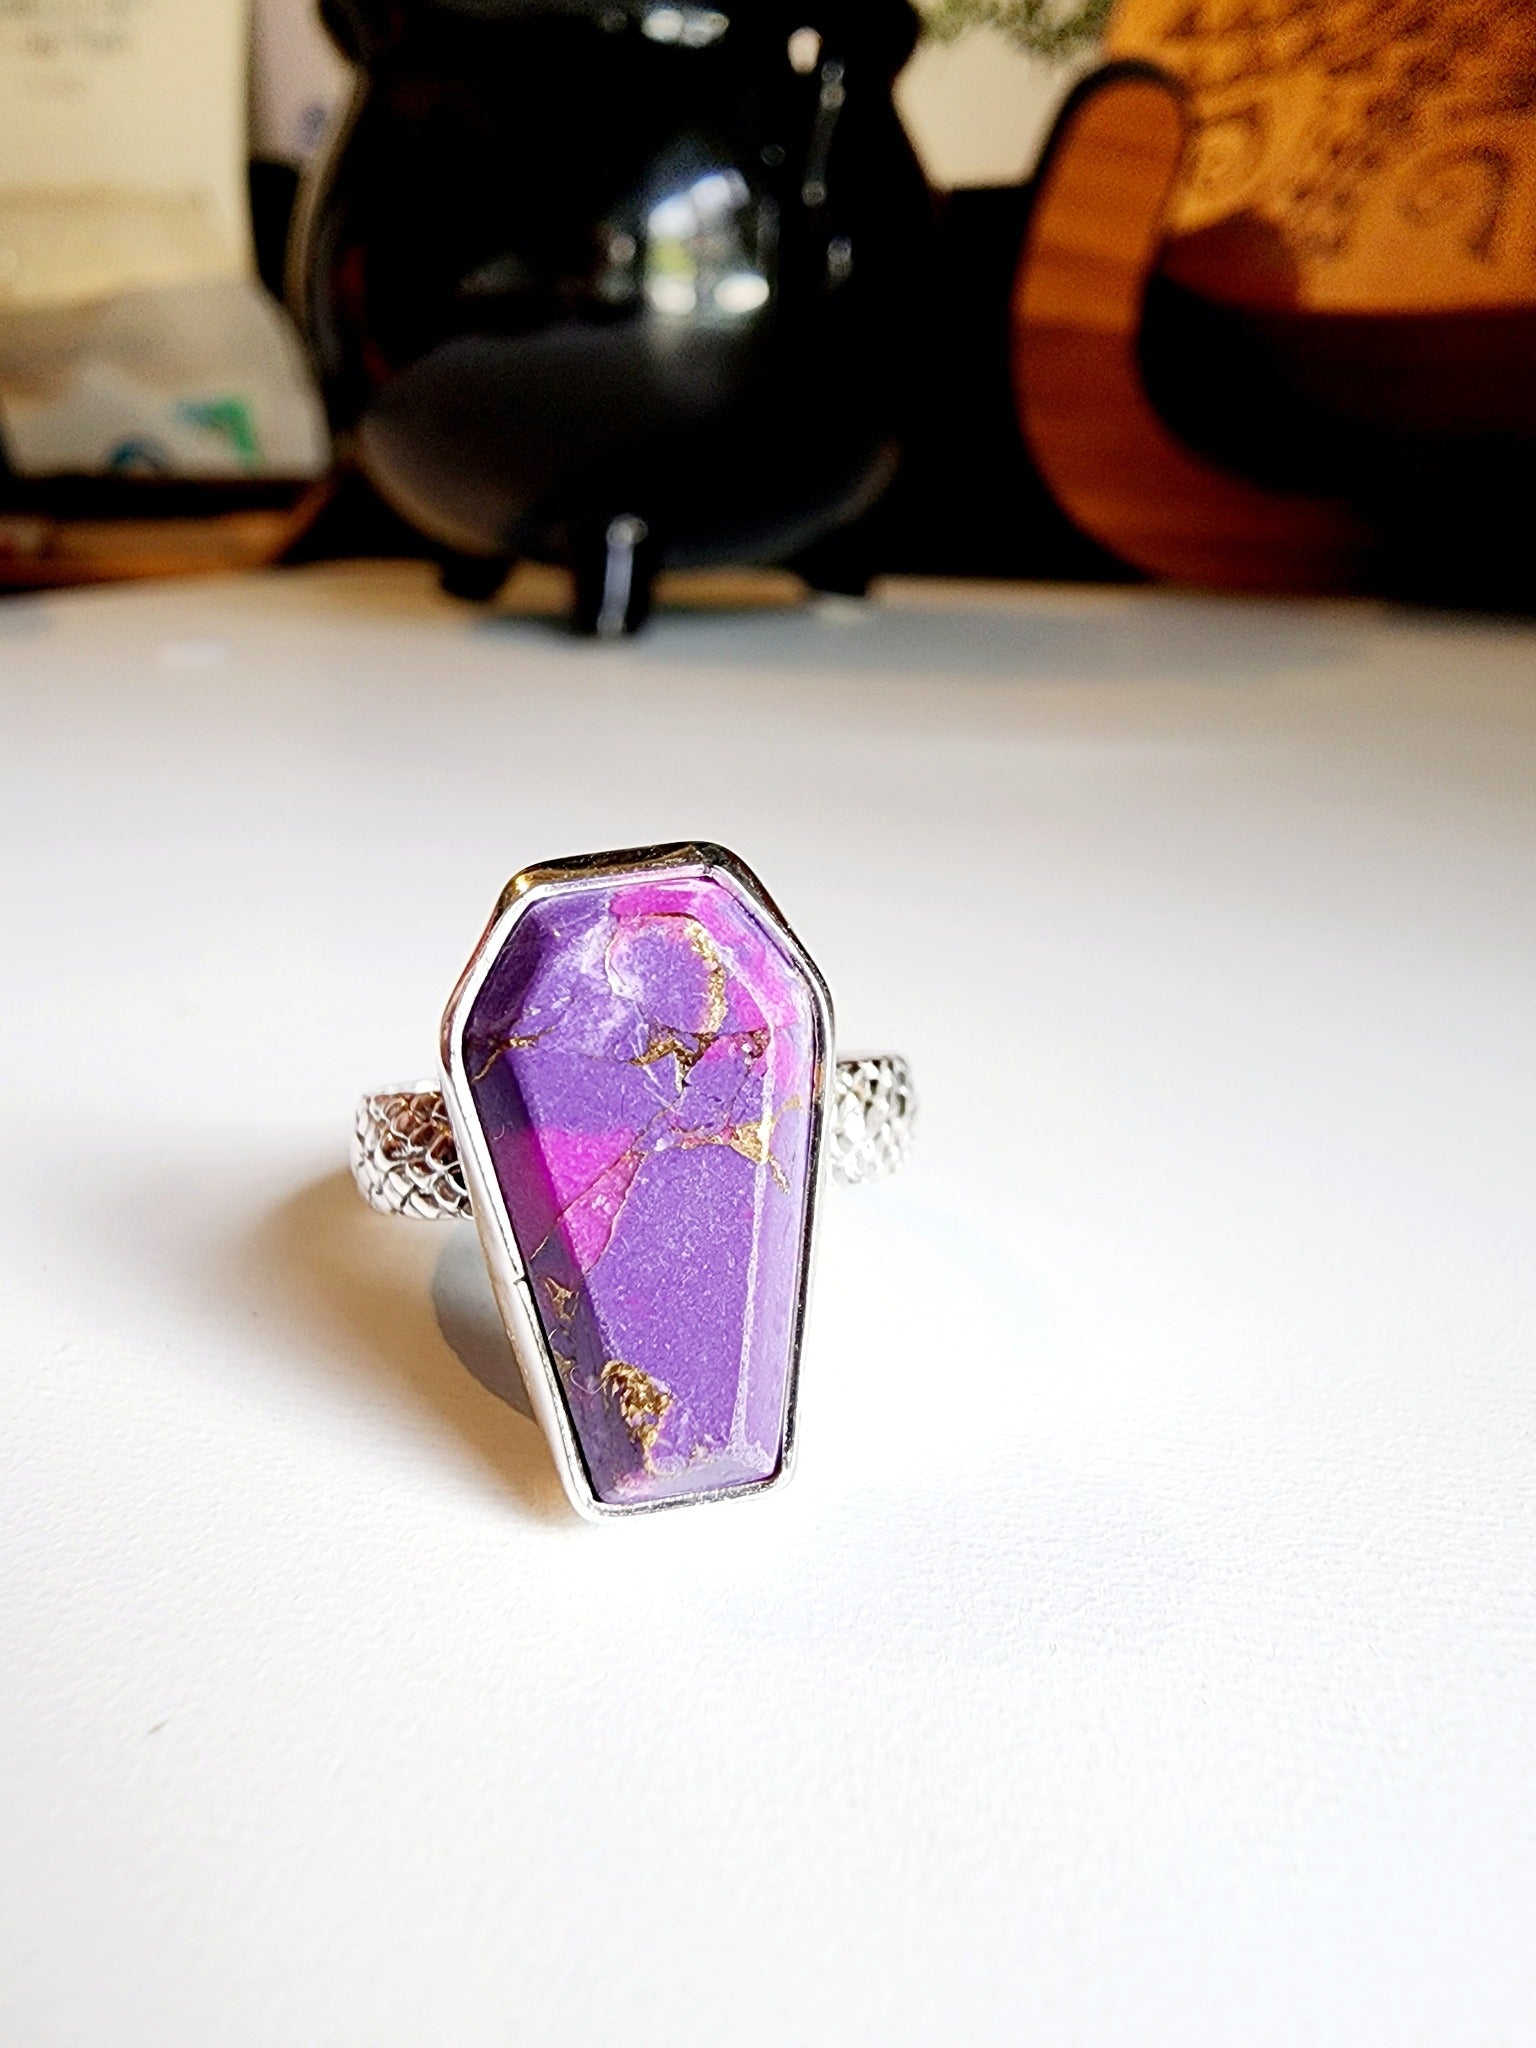 Purple with gold speckled coffin stone shaped ring with snakeskin like textured band